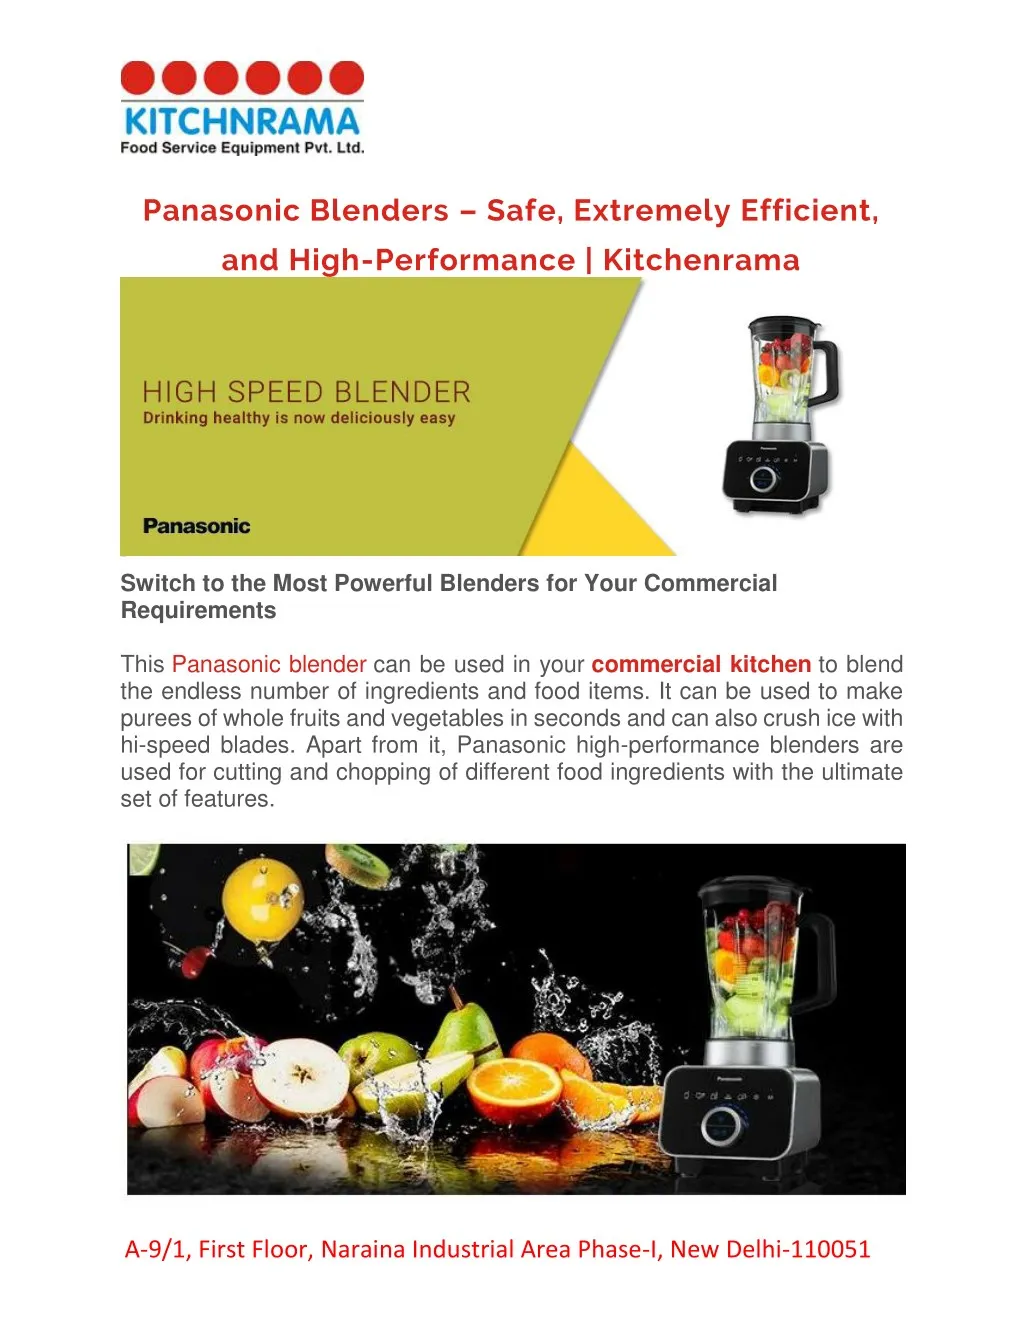 panasonic blenders safe extremely efficient